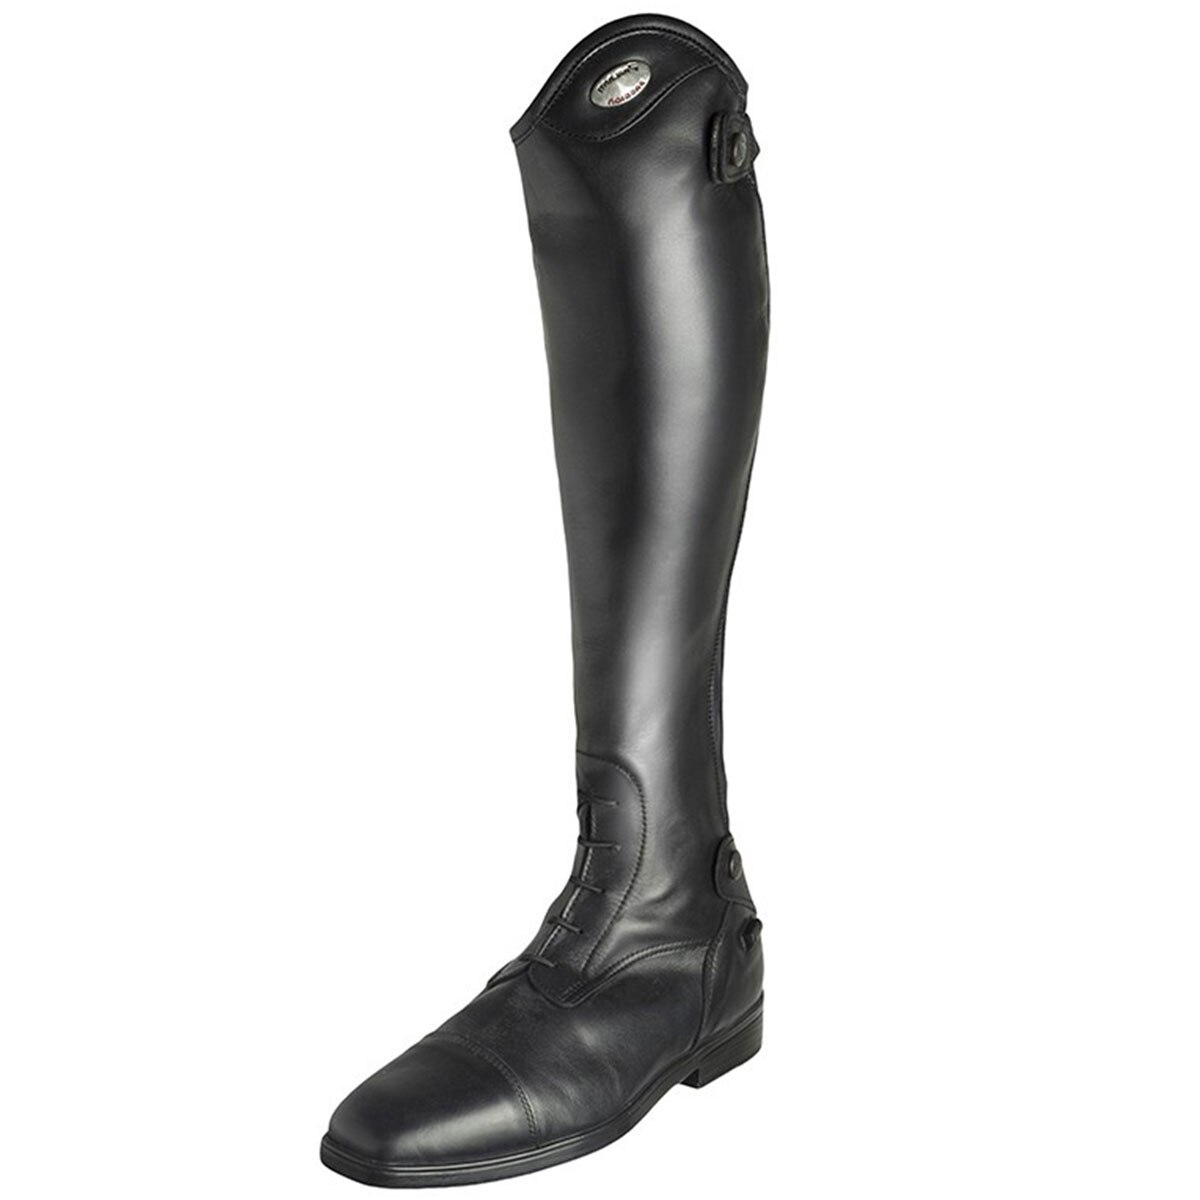 Horseware Laced Wide Womens Long Riding Boots EUR 39 Wide Black 